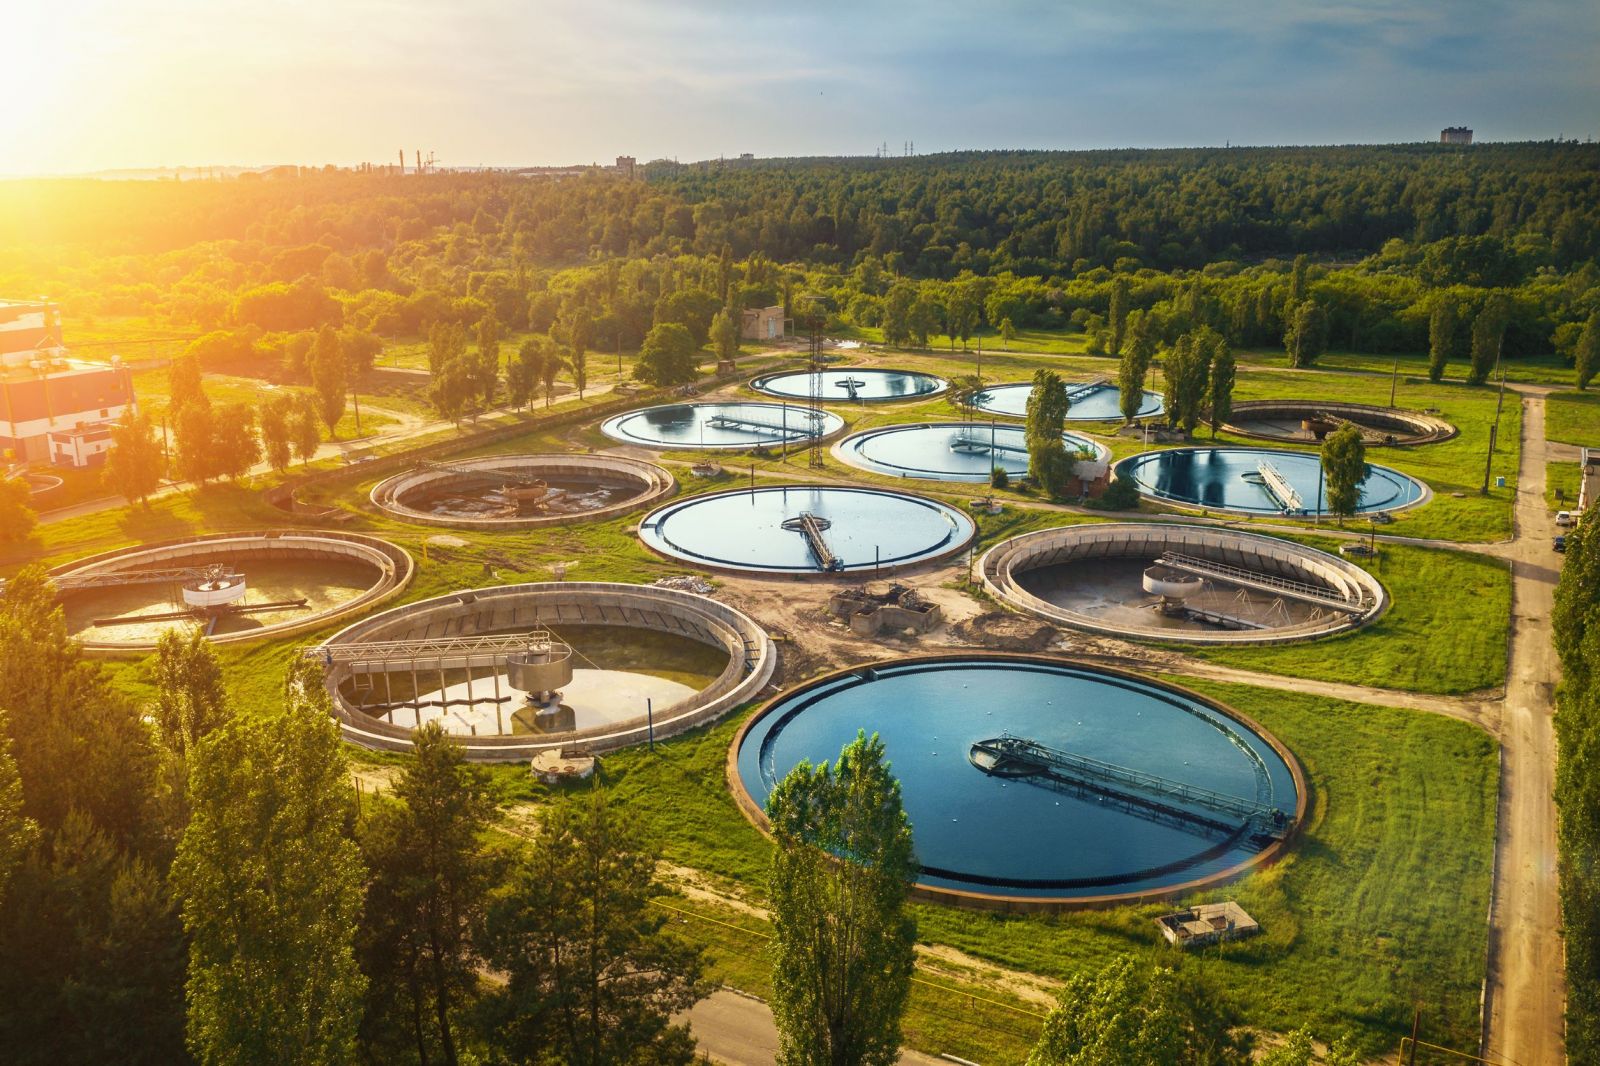 Save the Date: 3 February 2022 - Online Workshop on "Financial Sustainability of Wastewater Management in the Danube Region"